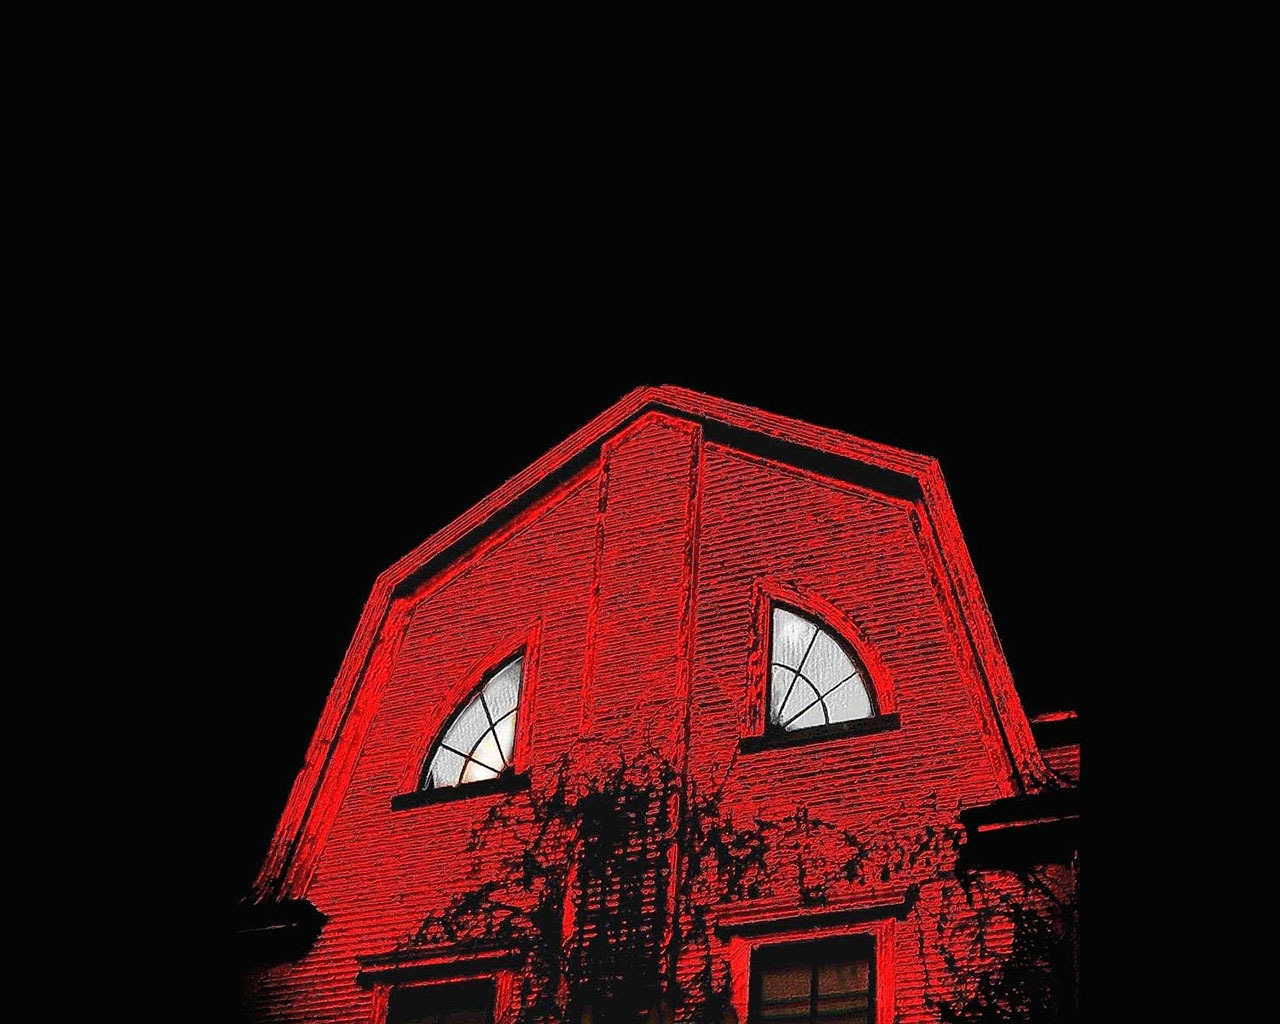 The Amityville Horror Lost Tapes for 1280 x 1024 resolution